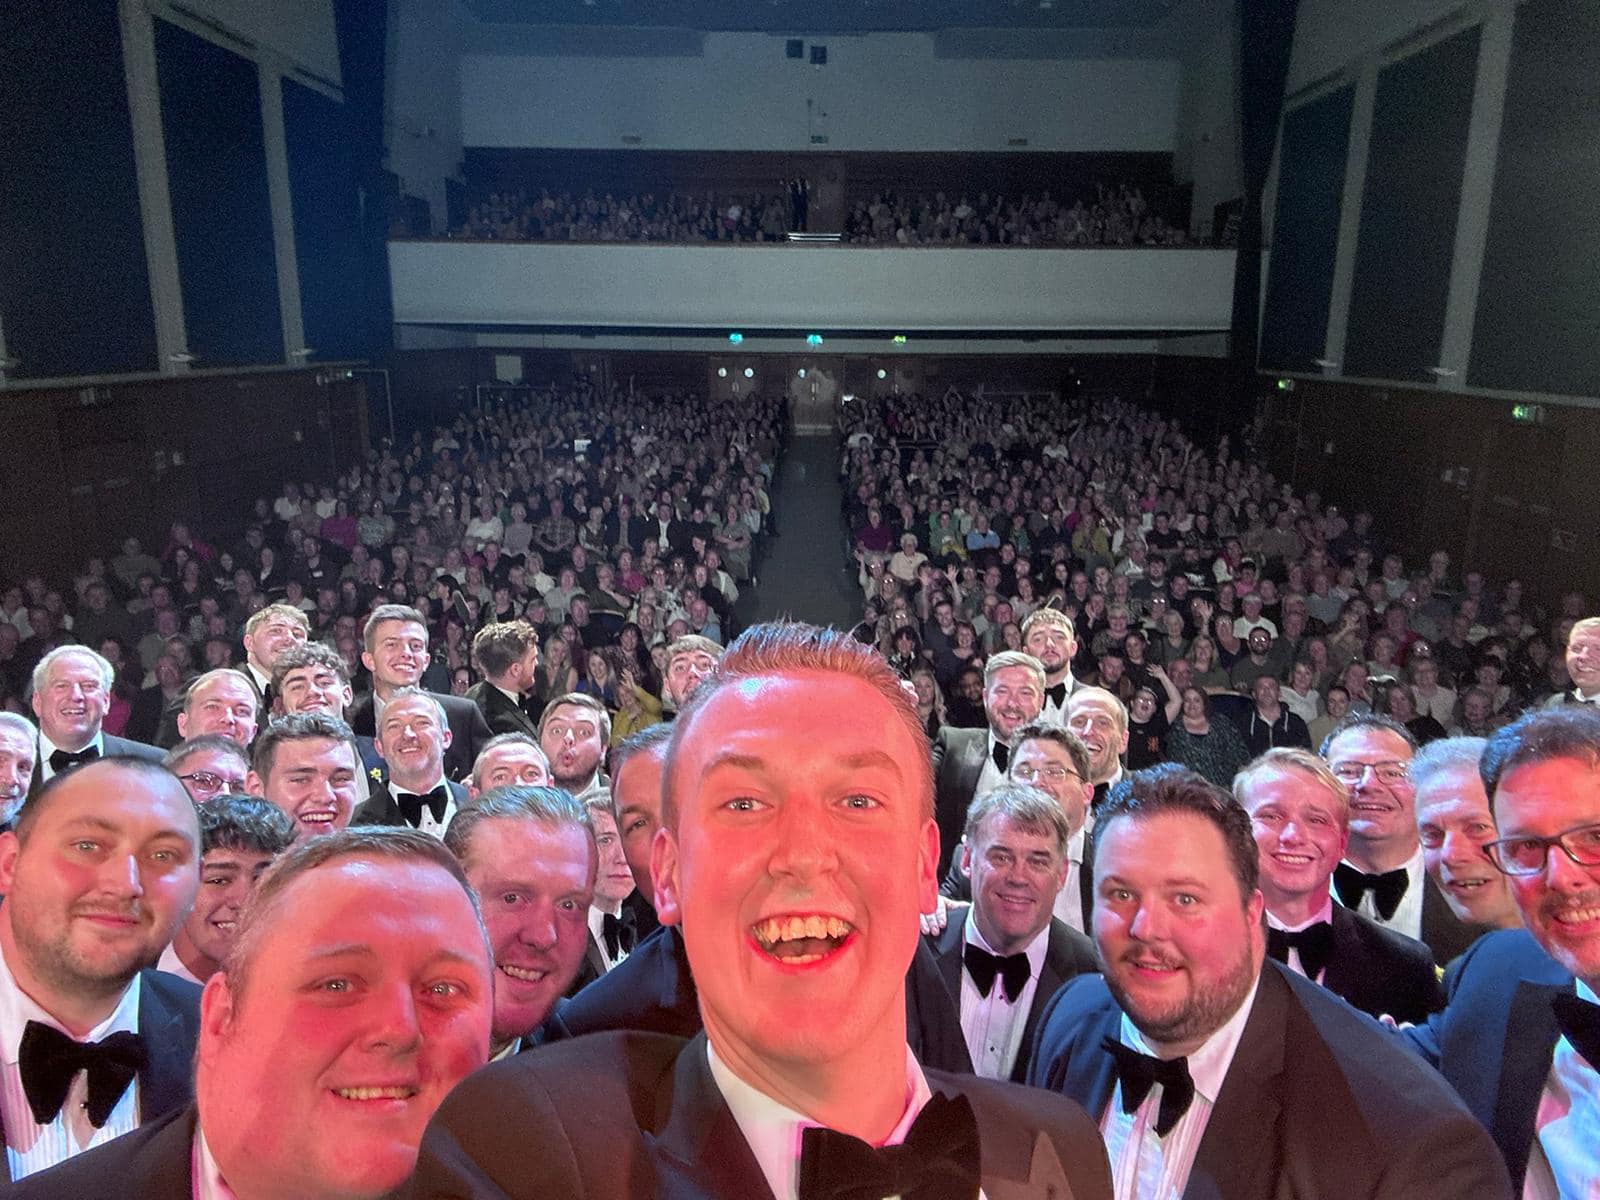 A selfie taken from stage at Johns' Boys concert at William Aston Hall in Wrexham in Sept 23